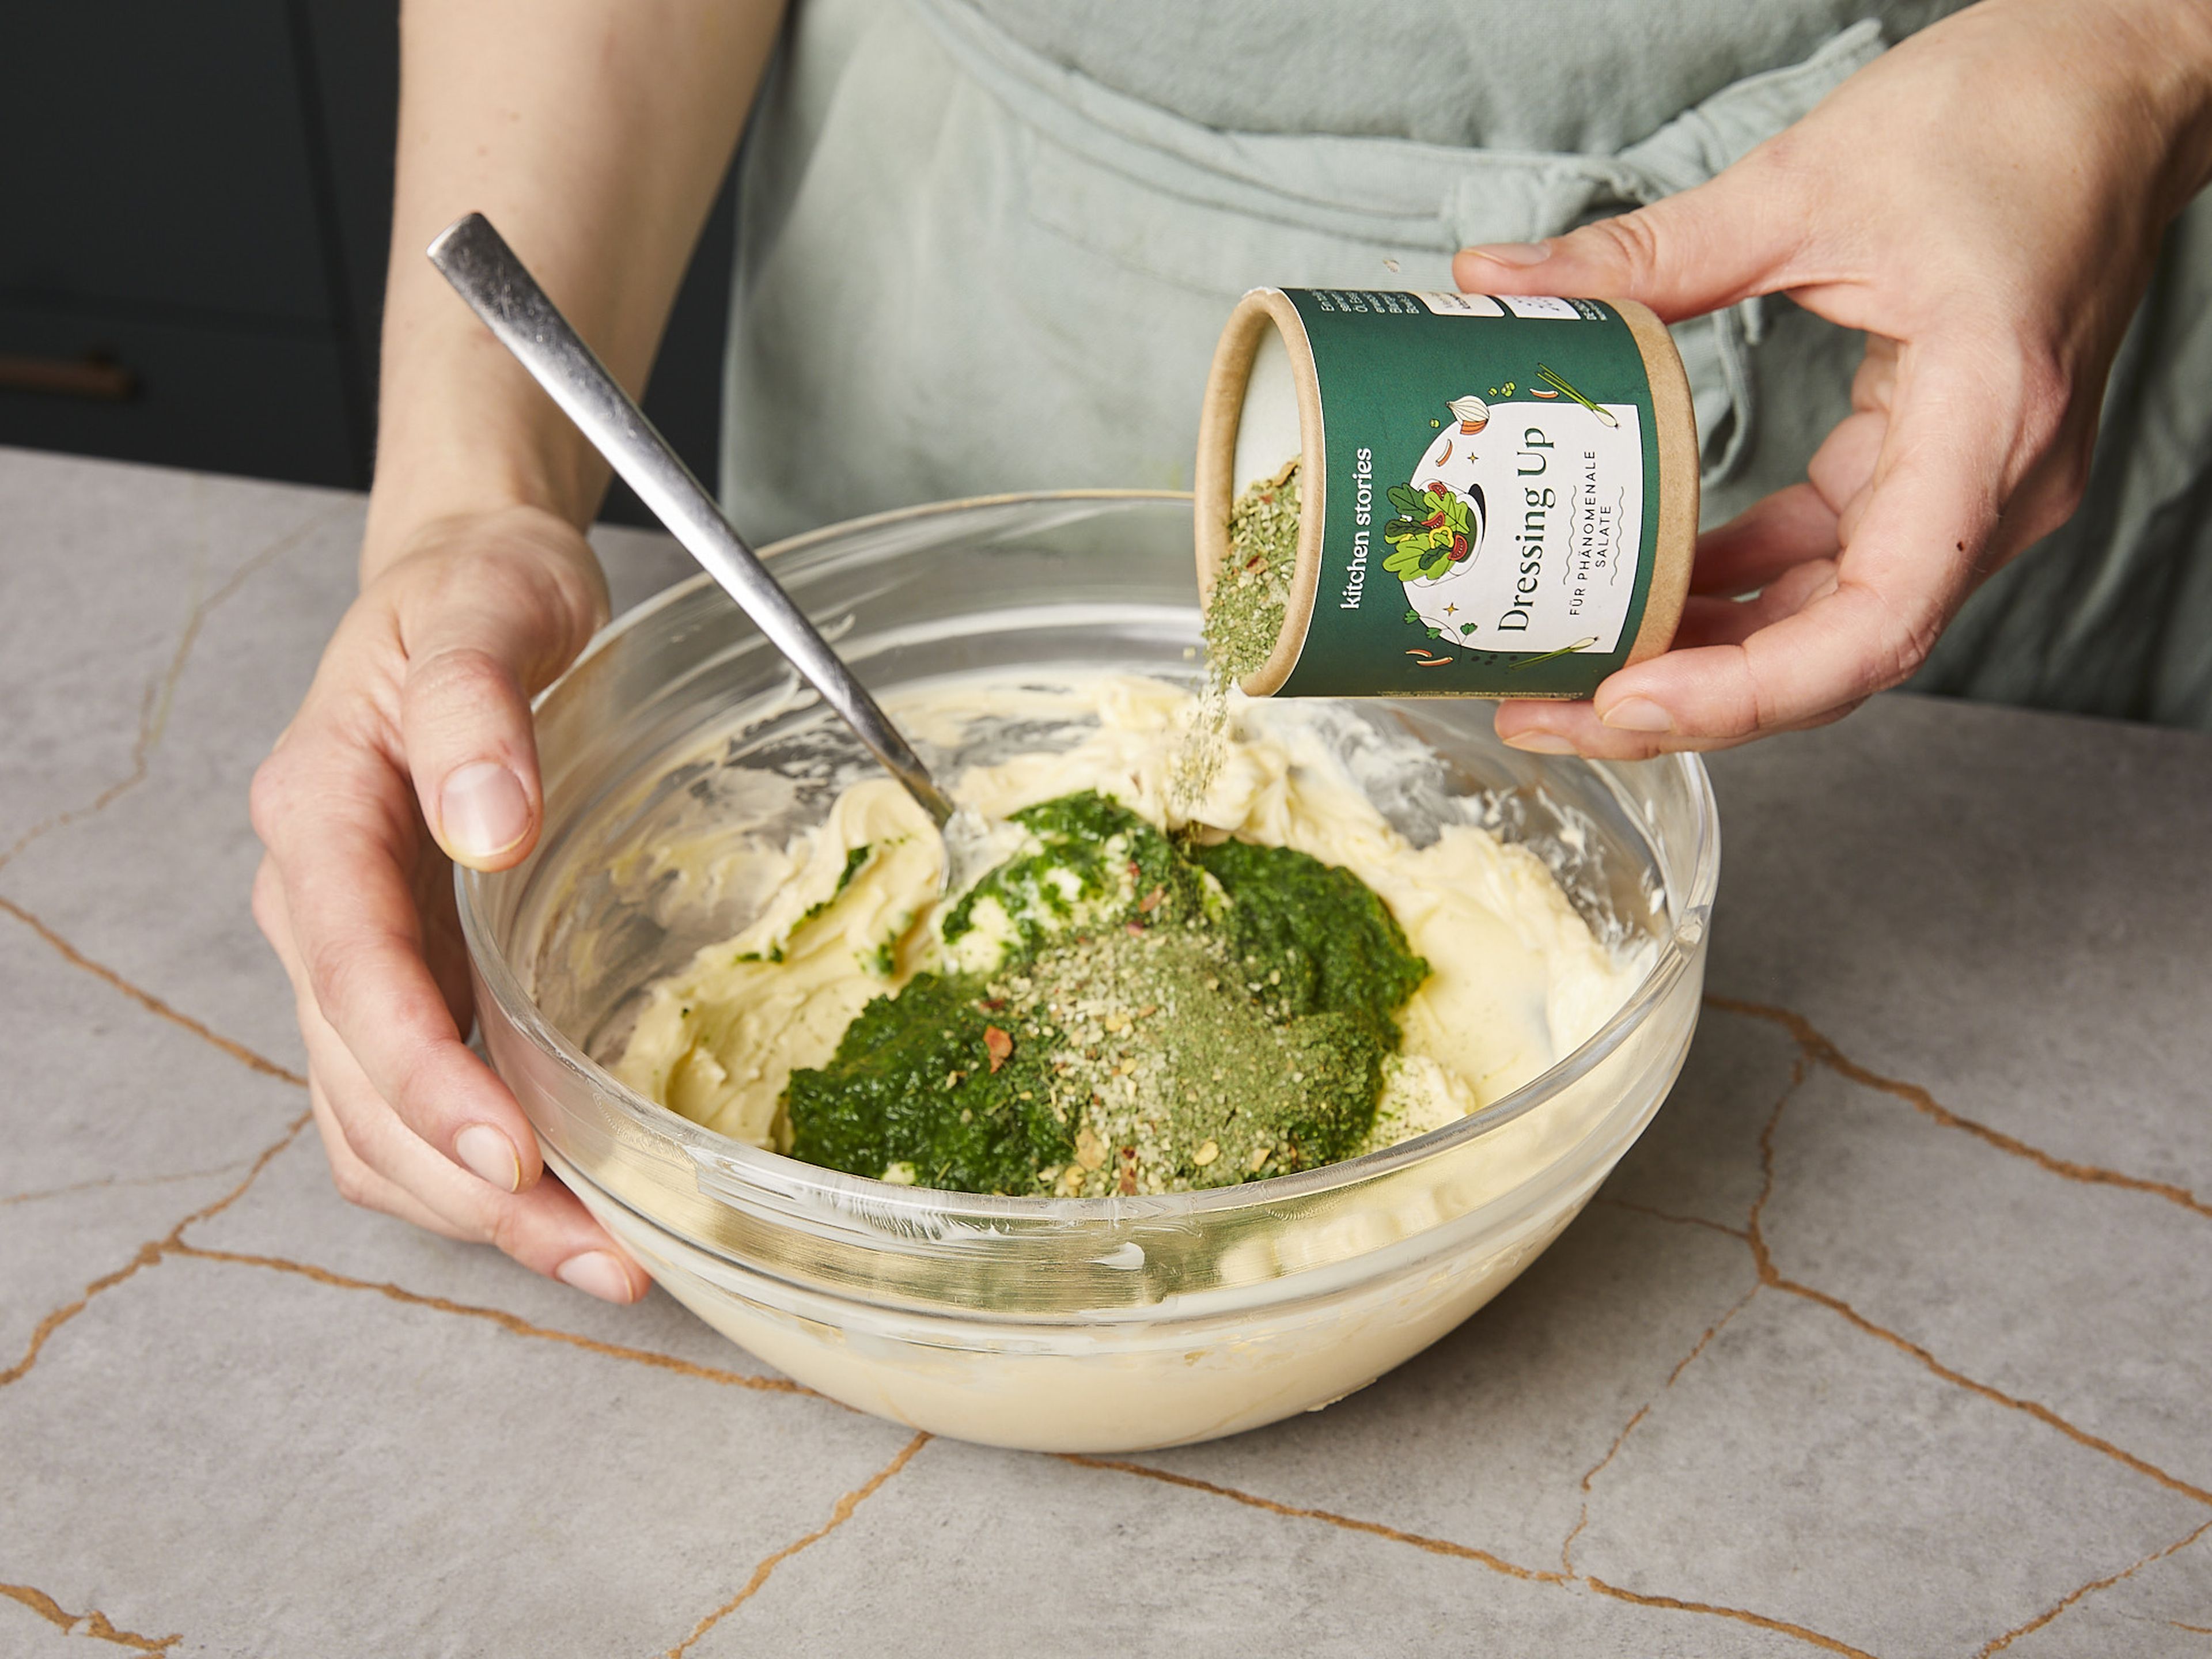 Purée spinach using an immersion blender. Add room temperature butter and our DRESSING UP seasoning to a bowl and add the spinach purée. Place in a container or in the covered bowl and store in the refrigerator until ready to serve. Serve with bread, for grilling or as a spread.